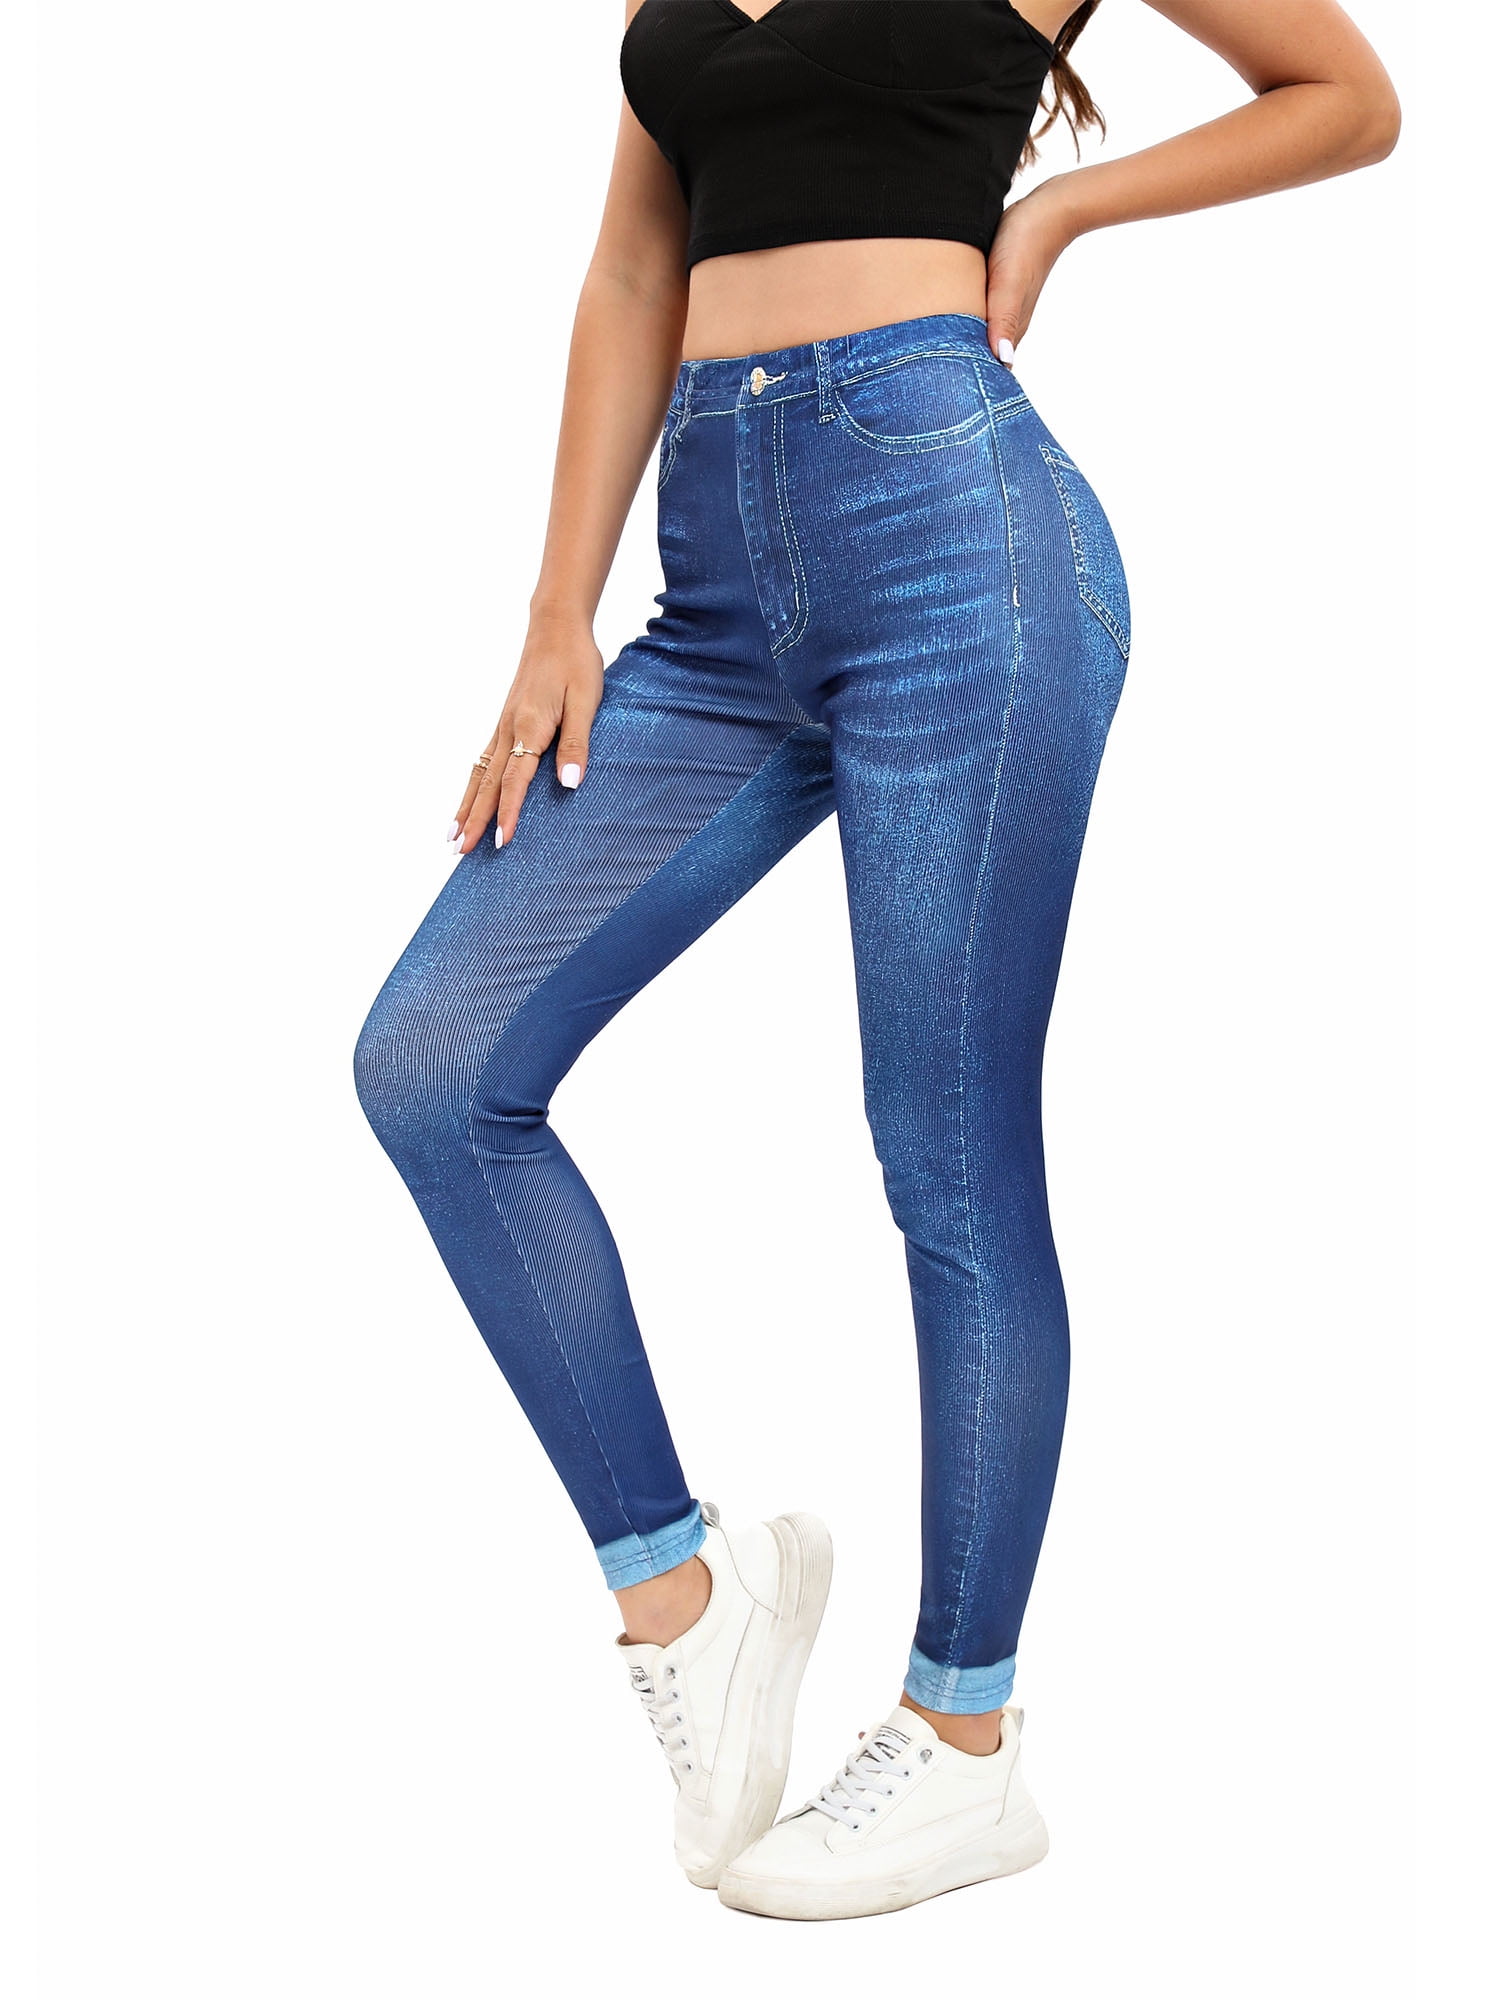 Frontwalk Jean Leggings for Women Printed Denim High Waisted Yoga Pants  Stretch Jean Look Jeggings Tights Blue-C M